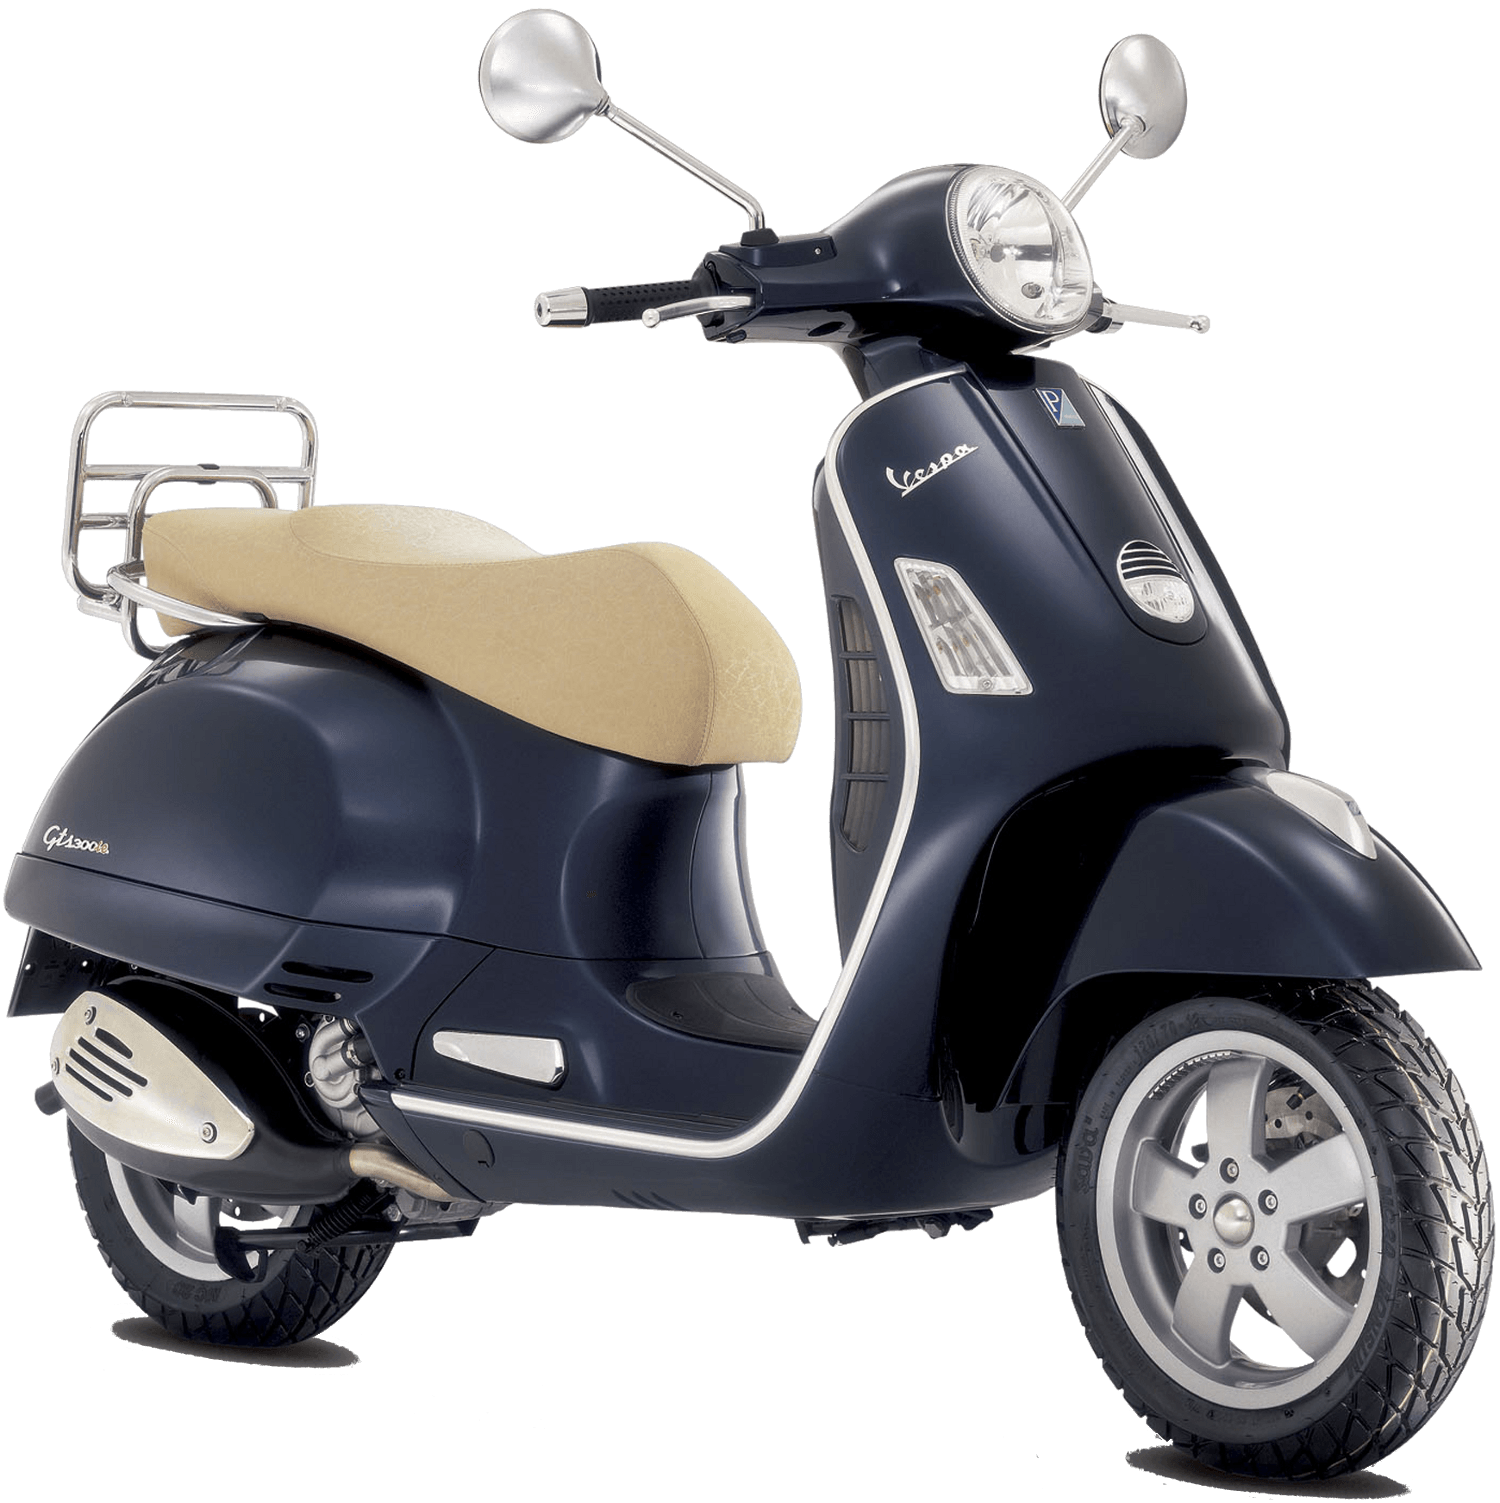 Scooter PNG Images HD